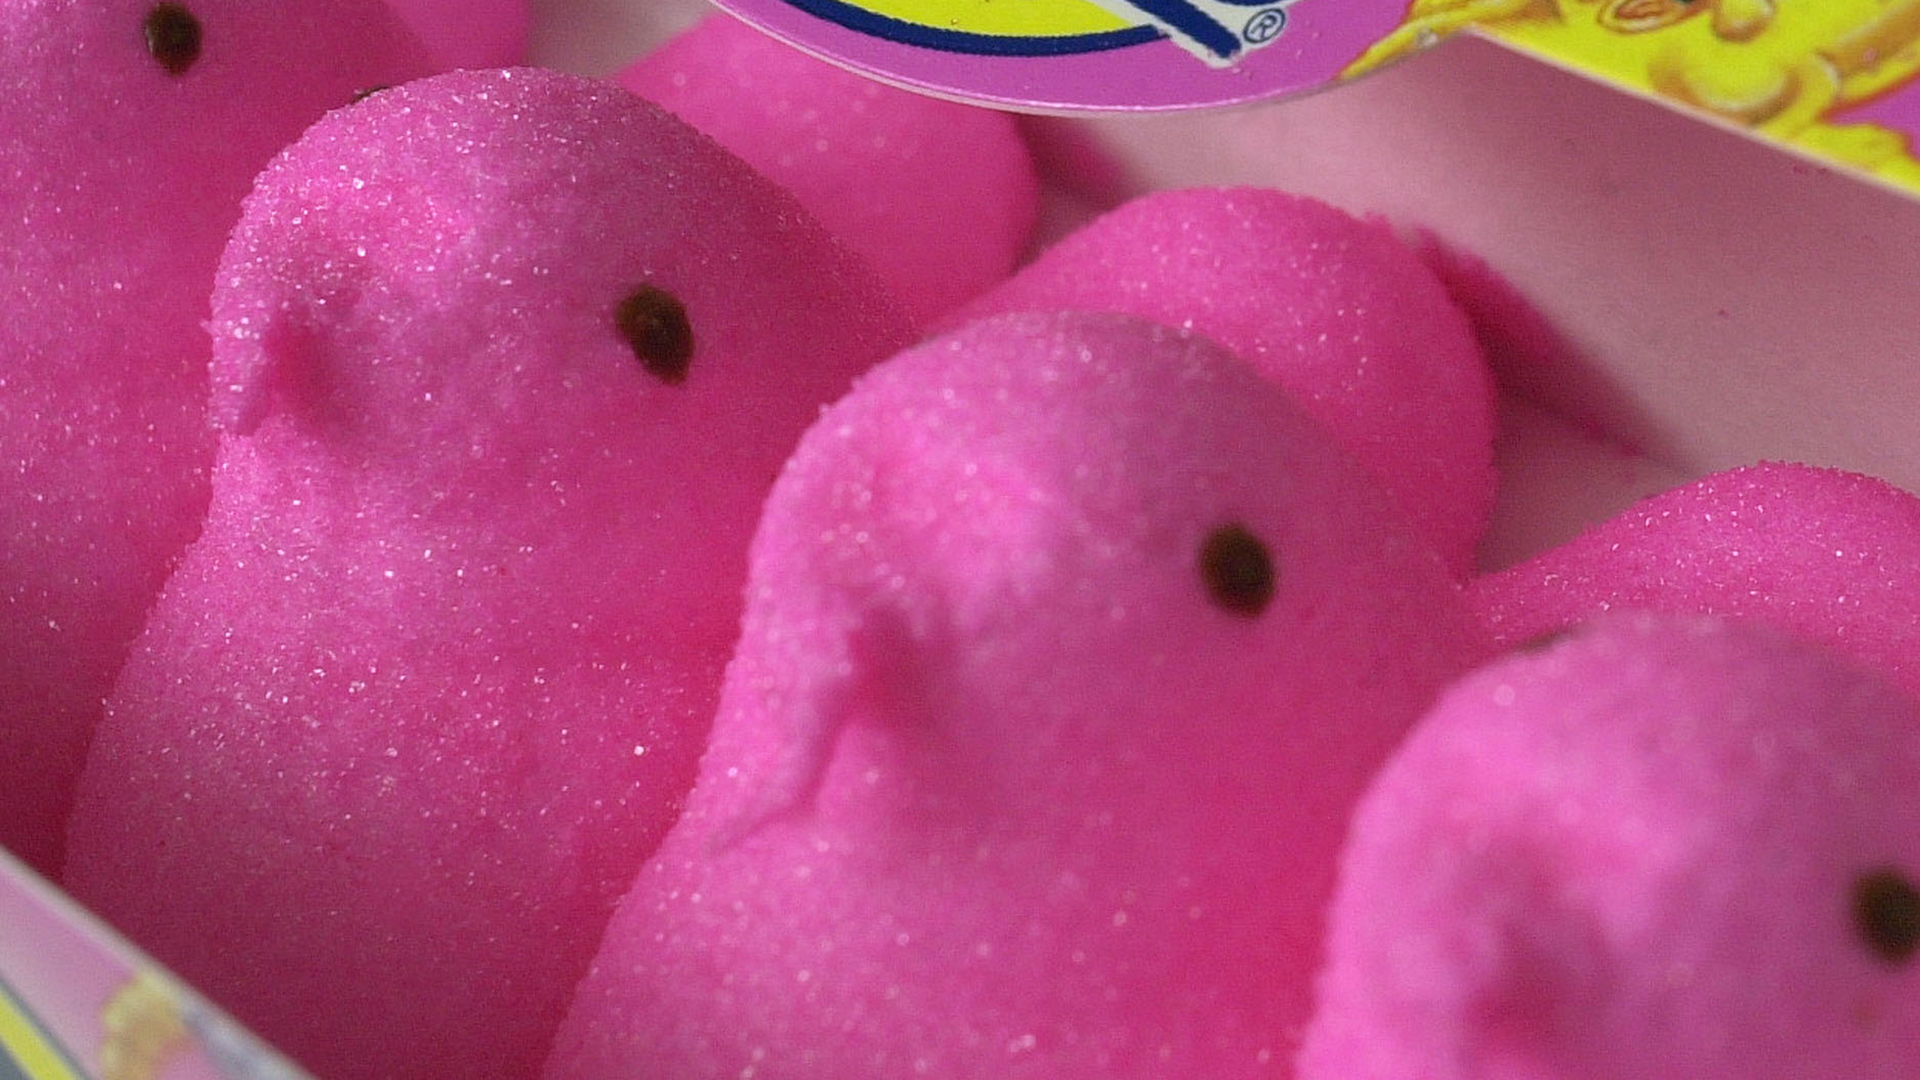 WARMINSTER, PA - APRIL 18:  Pink and yellow Marshmallow Peeps are seen April 18, 2003 in Warminster...